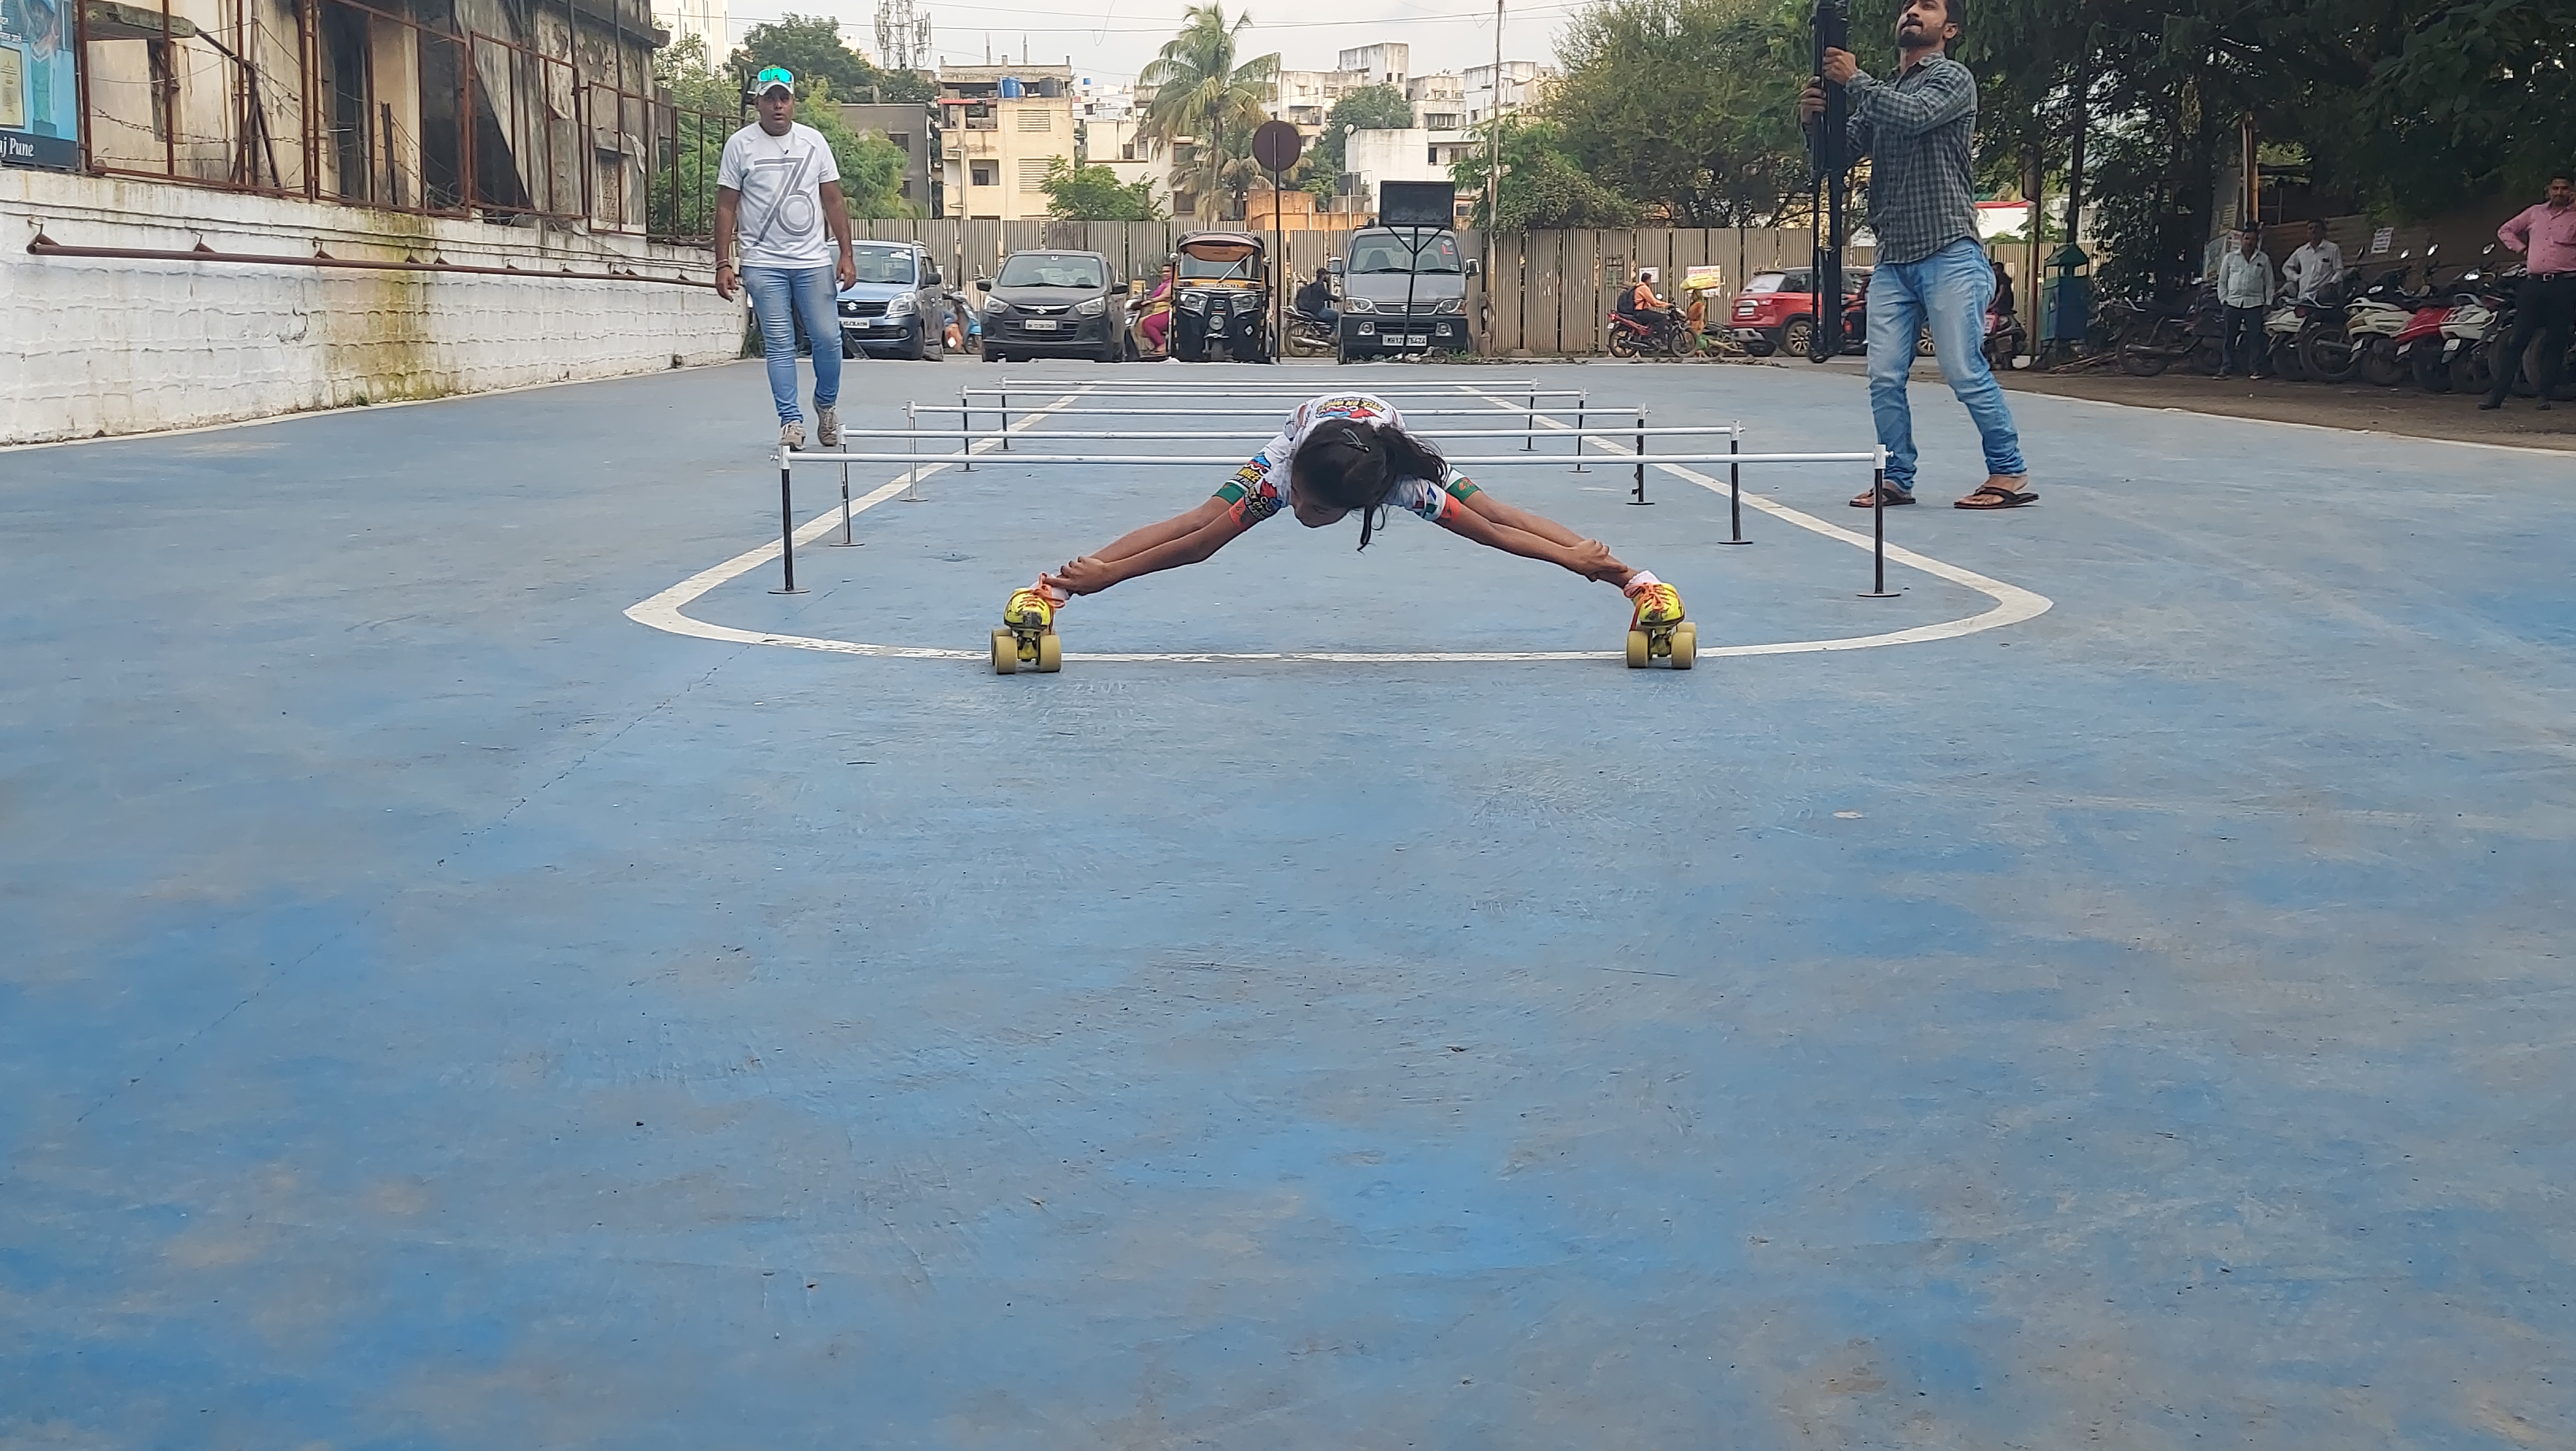 Seven-year-old Pune girl sets Guinness World Record for Limbo Skating